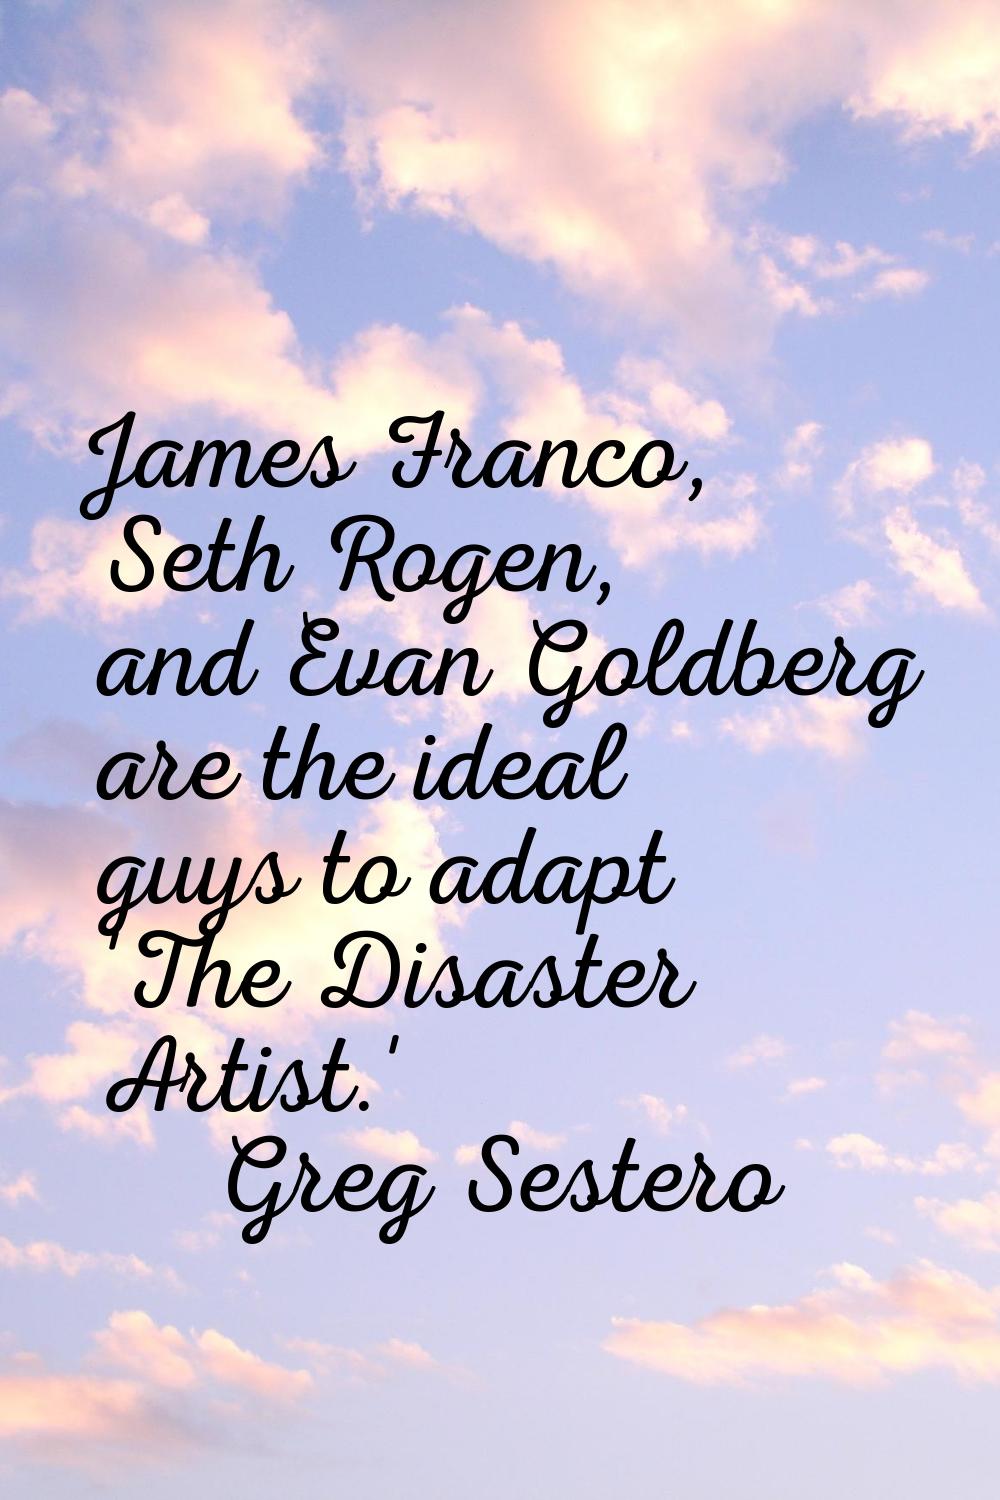 James Franco, Seth Rogen, and Evan Goldberg are the ideal guys to adapt 'The Disaster Artist.'